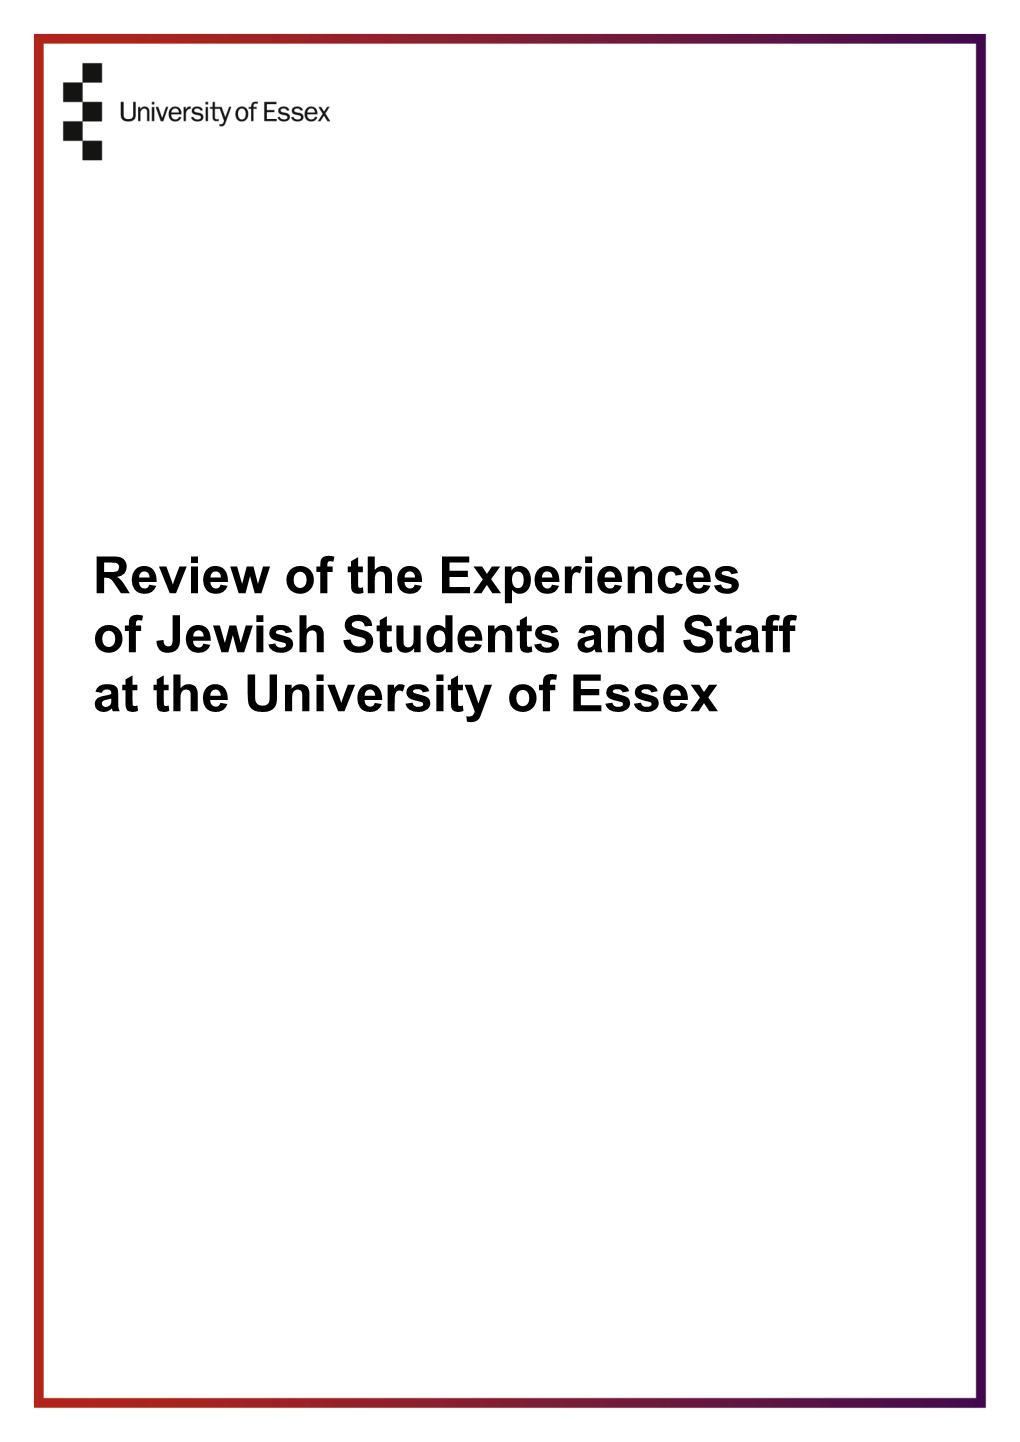 Review of the Experiences of Jewish Students and Staff at the University of Essex